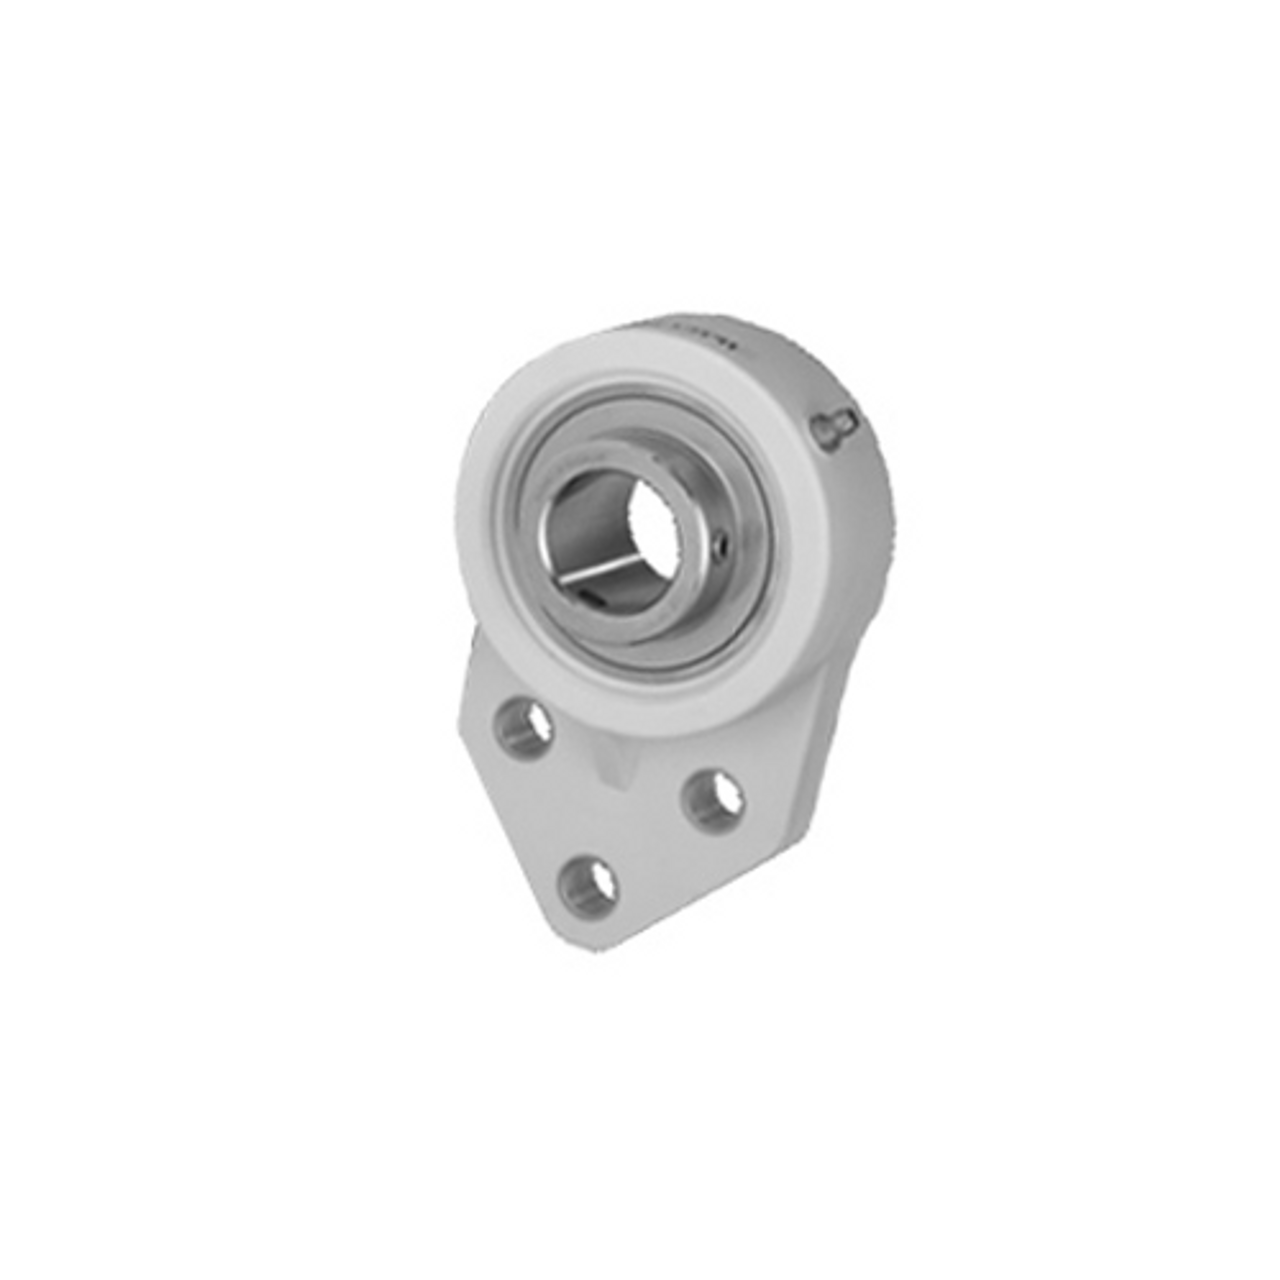 IPTCI SUCSFB20210  3-Bolt Stainless Steel Flange Bracket, 5/8"